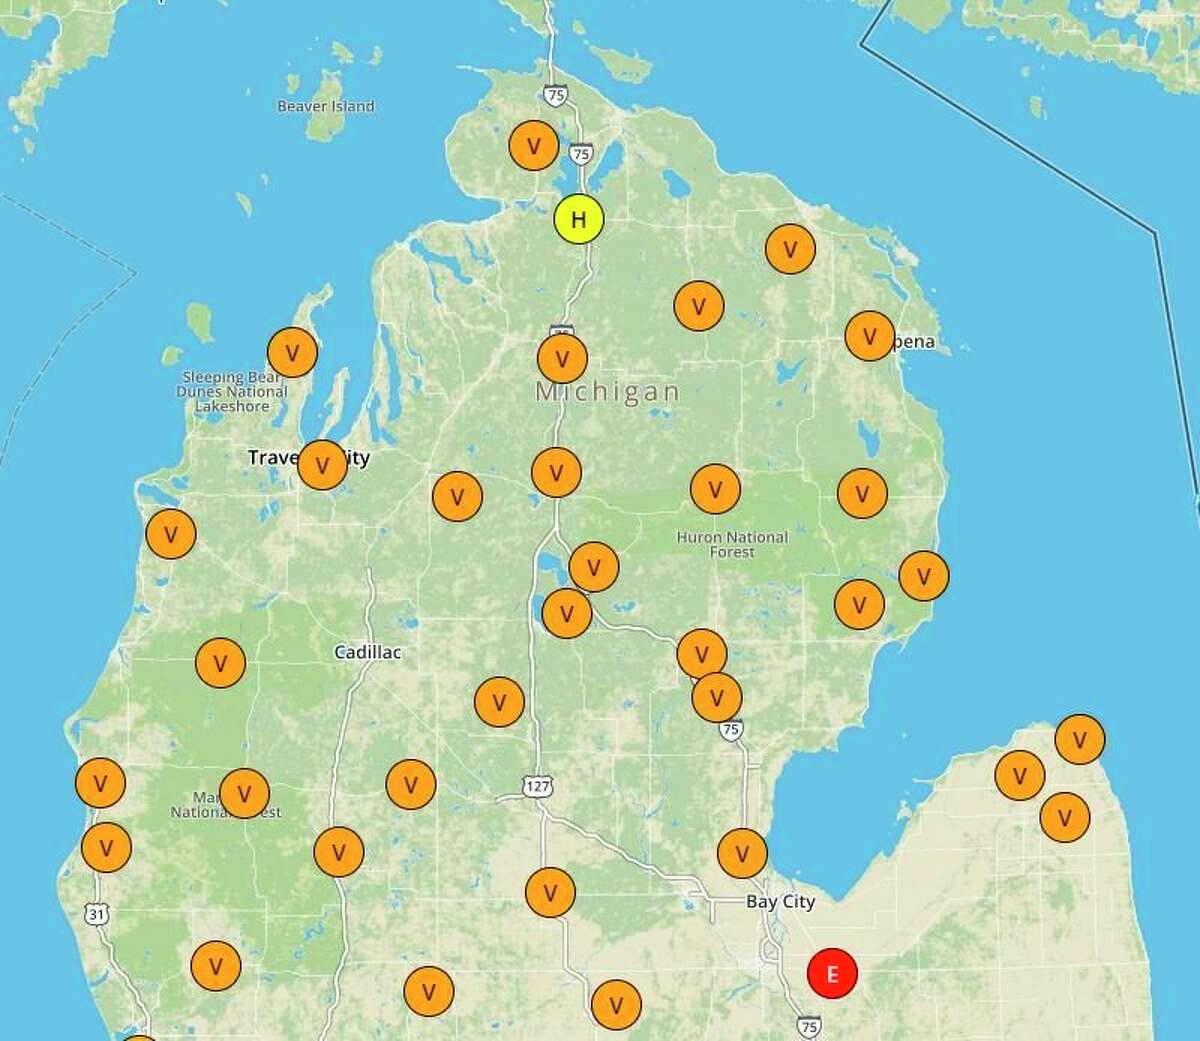 Most of the Lower Peninsula is showing very high fire danger according to the Great Lakes Fires and Fuels map Friday afternoon. (glff.mesowest.org map screenshot)